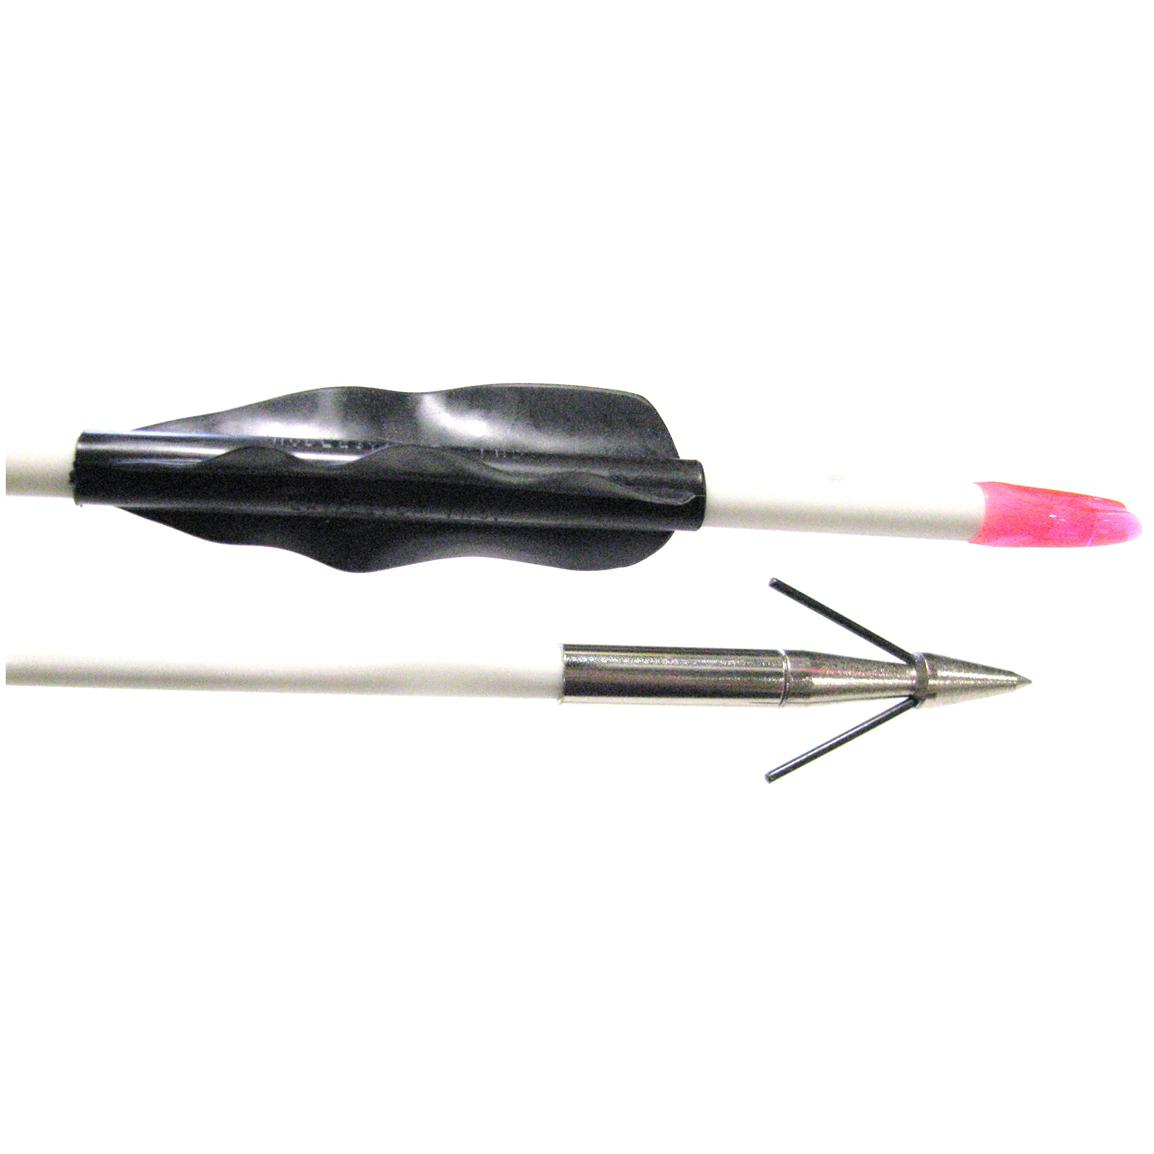 Cajun® Bowfishing Arrow with Lil' Stinger Point 192200